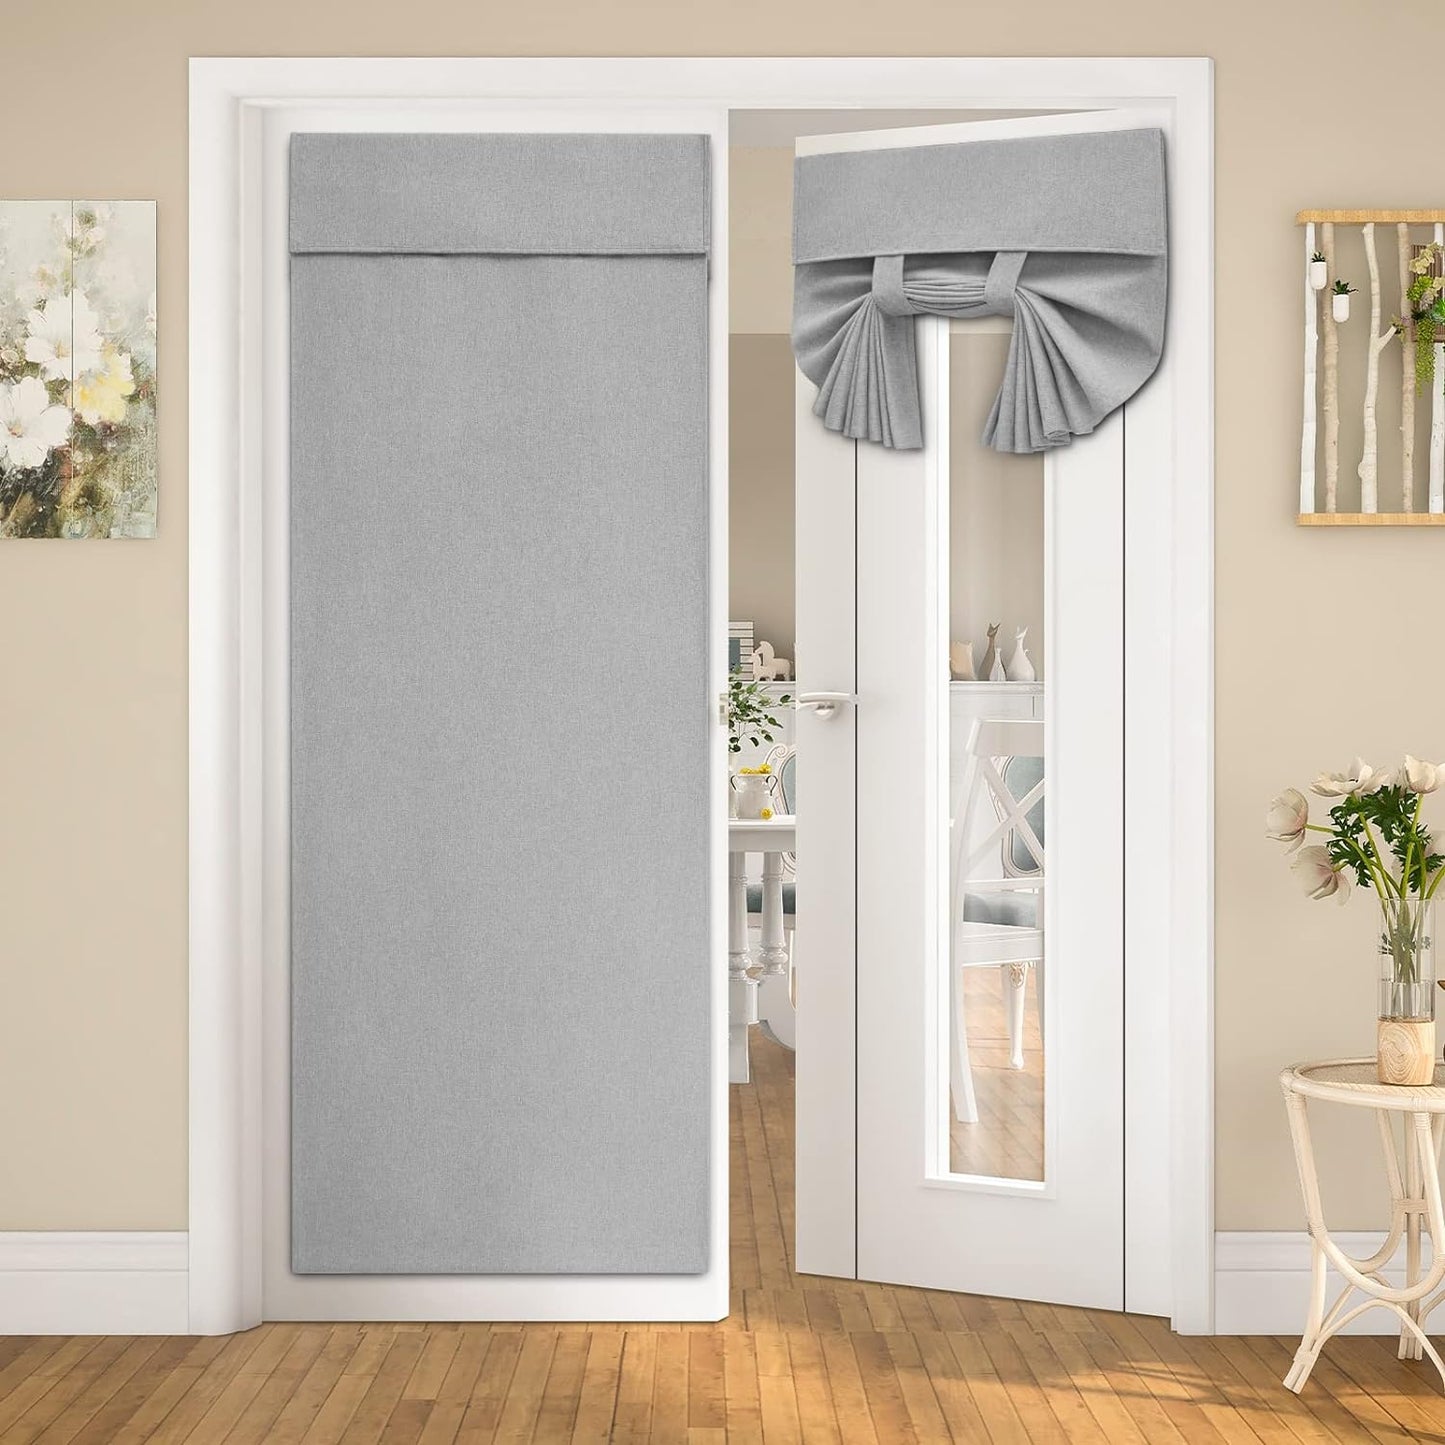 HOMEIDEAS Natural Linen French Door Curtains, Privacy Door Window Curtains Panel, French Door Shade for Door Window, Thermal Insulated Door Window Covering for Bedroom, W26 X L40 Inch, 1 Panel  HOMEIDEAS Light Grey 1 Panel-W26" X L68" 